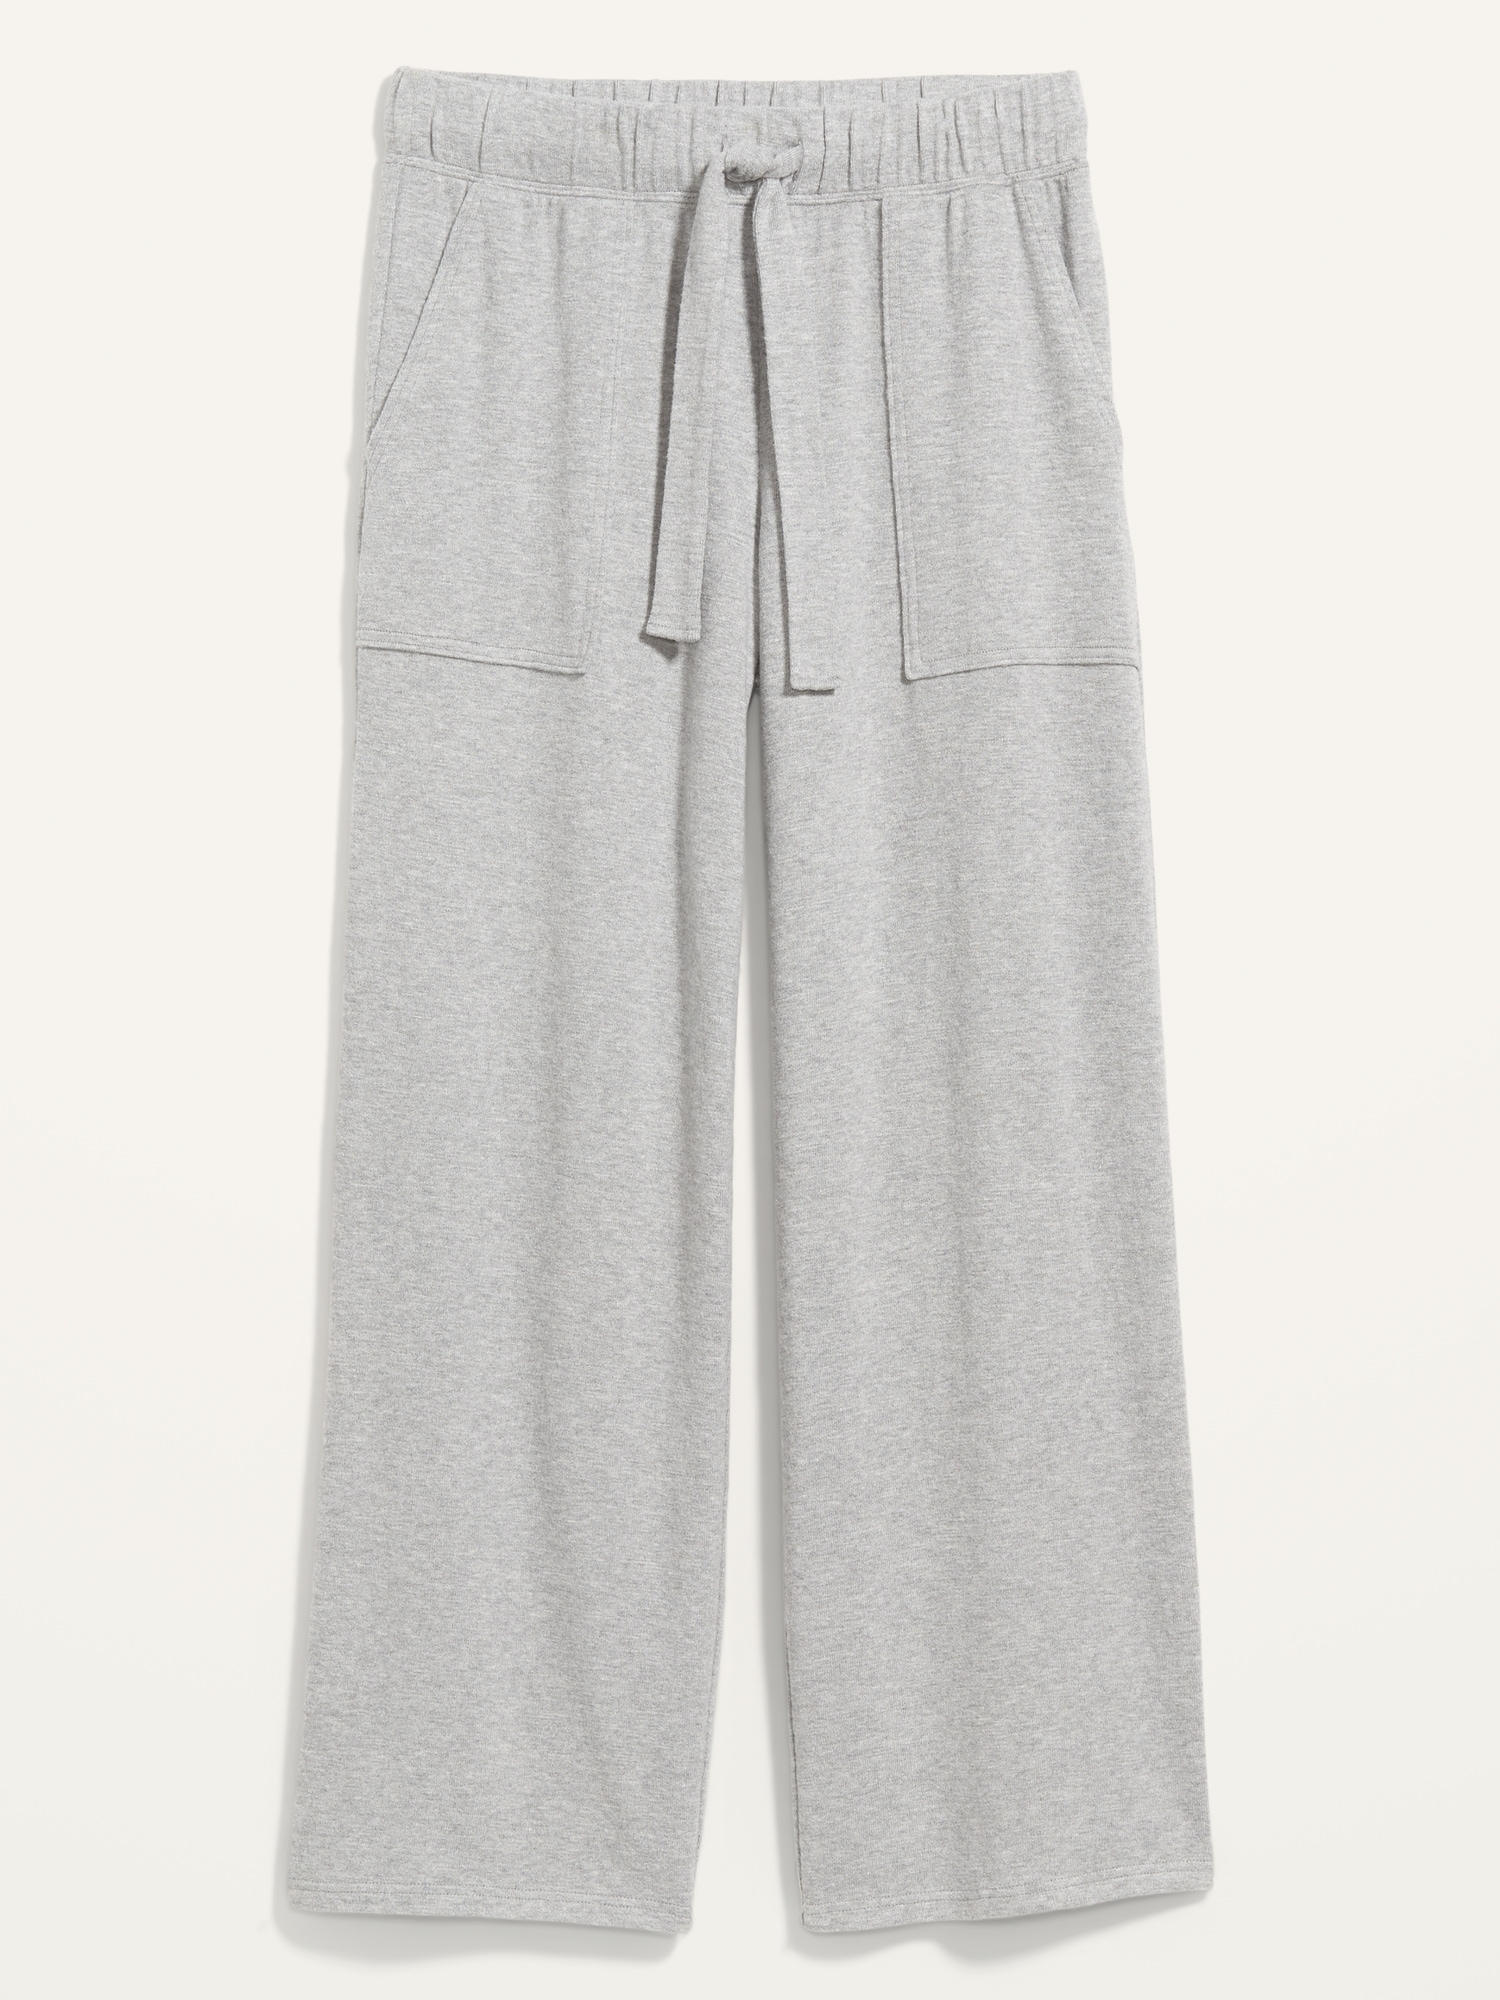 High-Waisted Cozy Plush-Knit Pajama Pants for Women